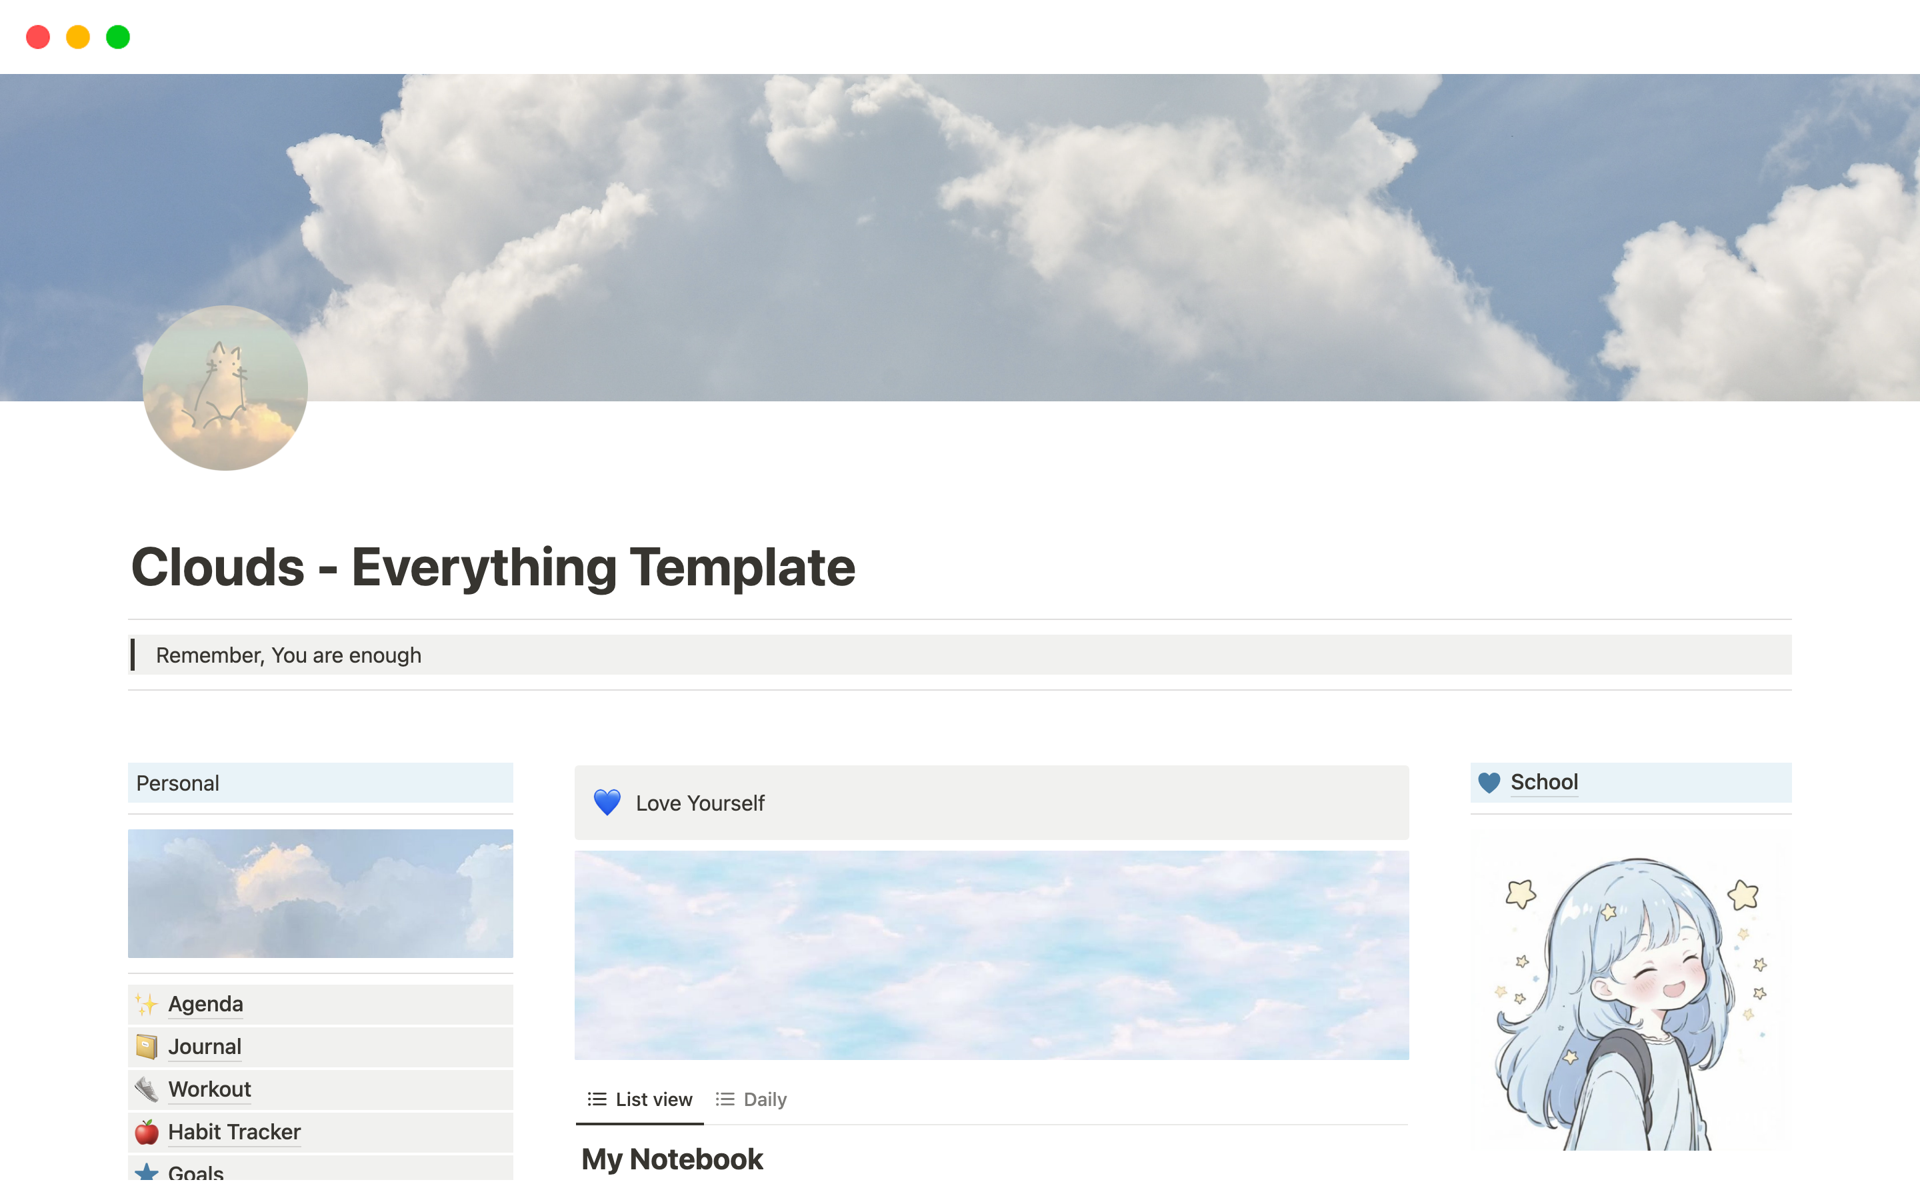 A template preview for Clouds - Everything Template